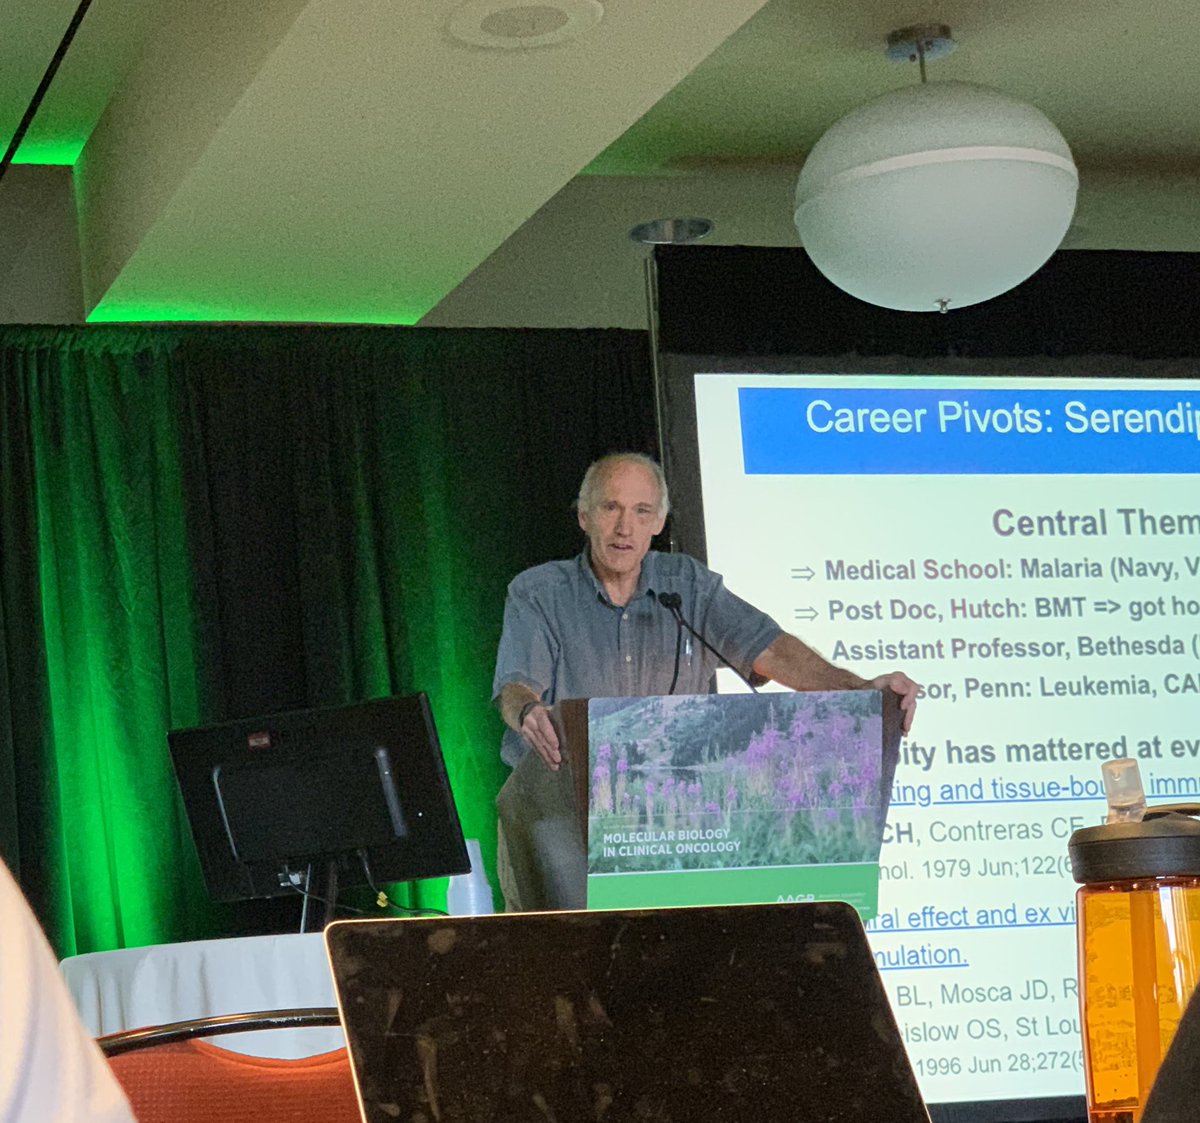 @AACR Day 3 of Molecular Biology in Clinical Oncology. Exemplary talk from Dr Carl June on CART cells #CART #pastpresentfuture #Cellulartherapies #MBCO19 #ASPEN